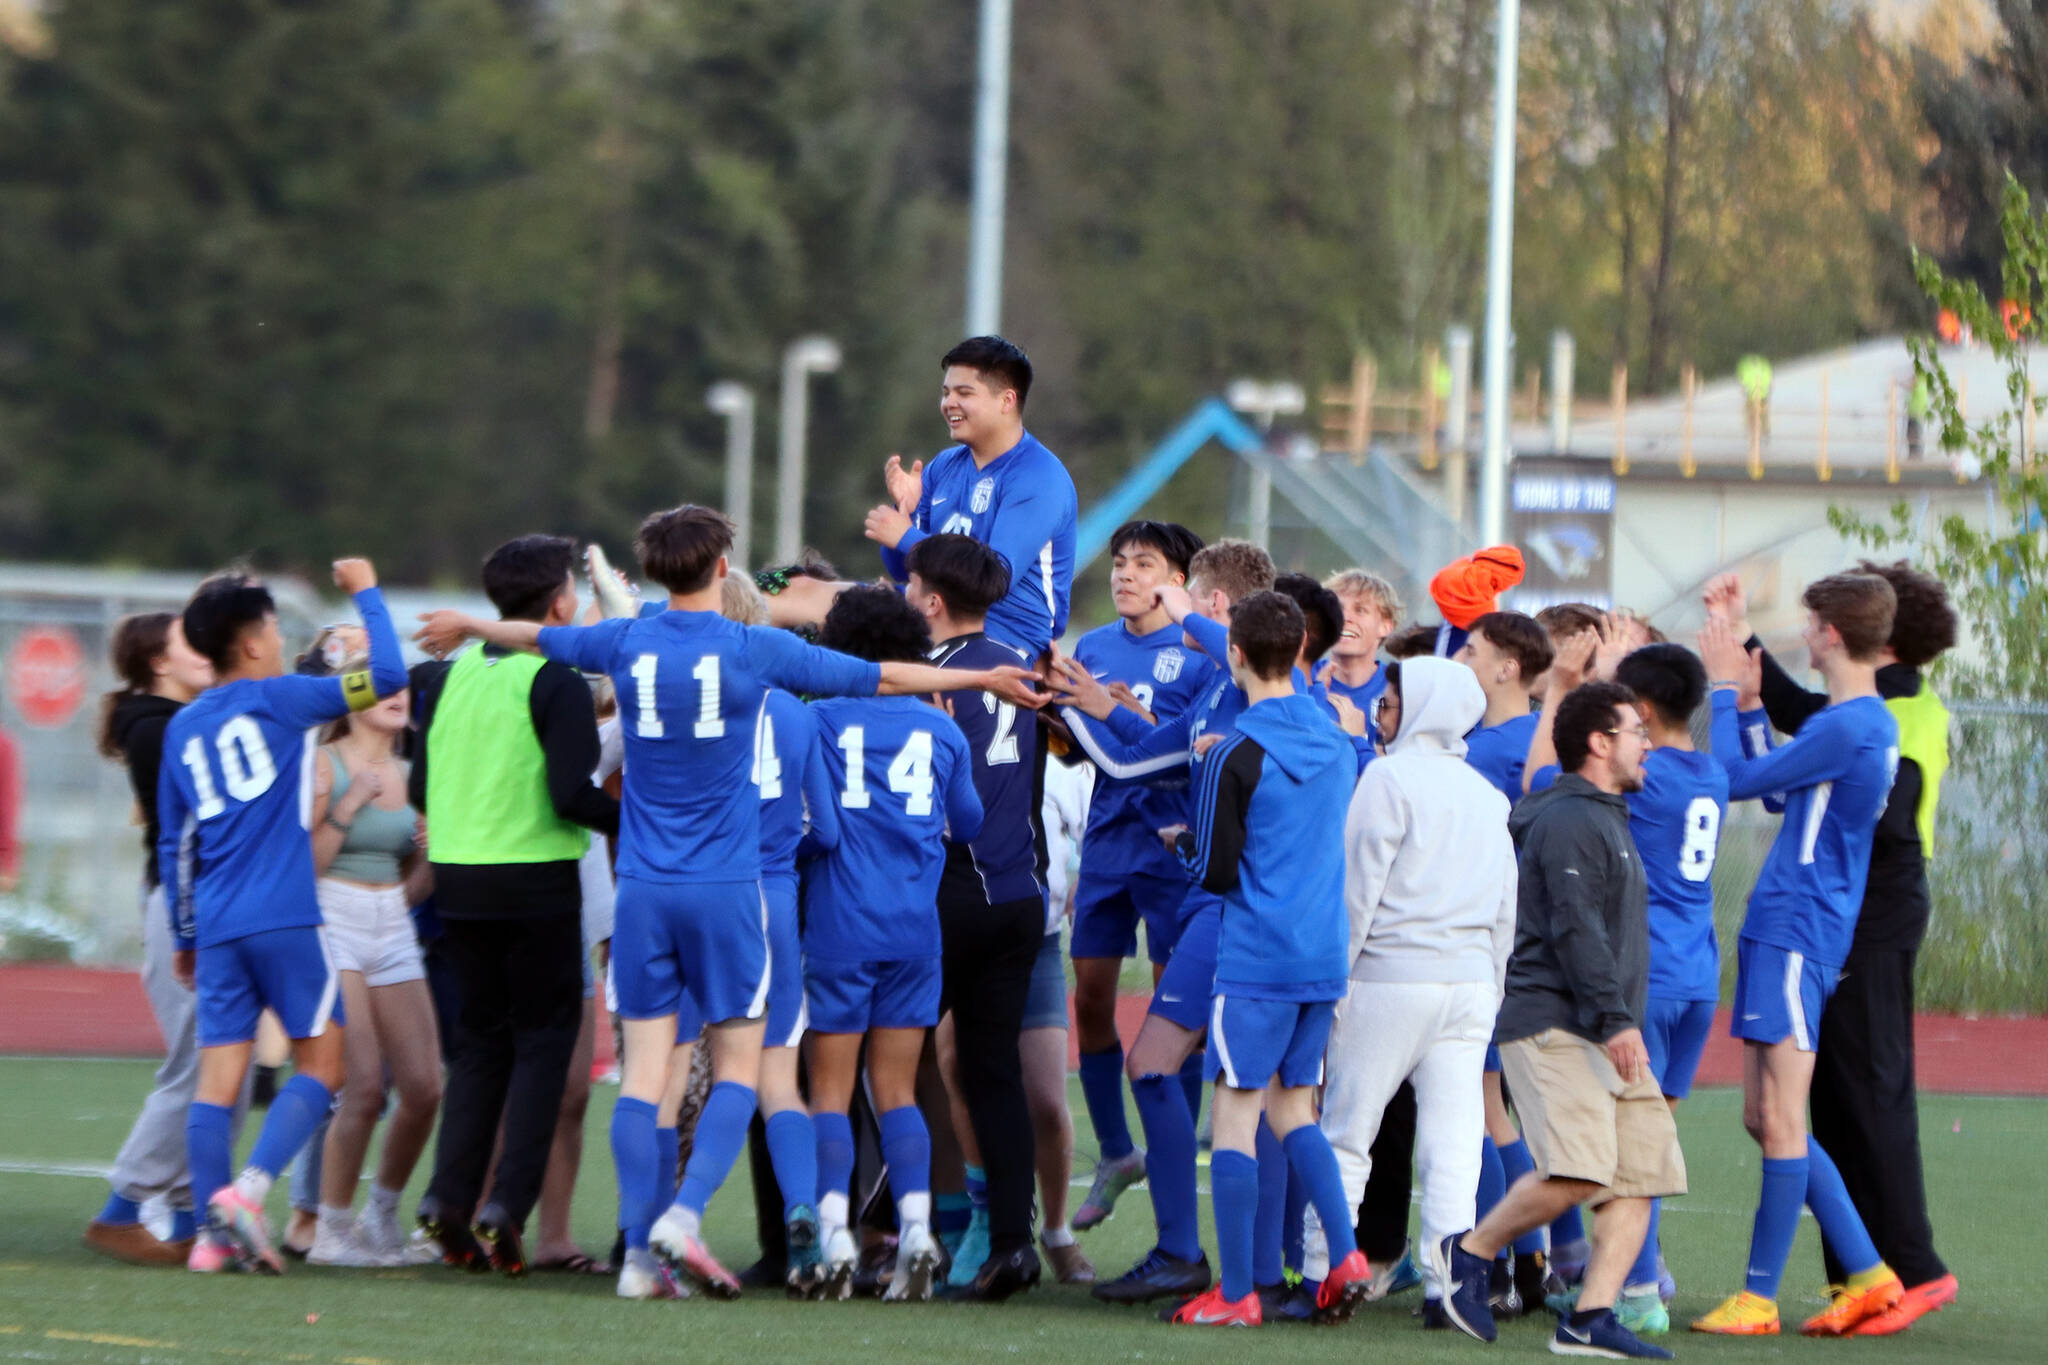 The TMHS boys soccer team hoists senior Omar Alvarez following his four-goal performance Saturday on senior night. Alvarez had not scored a goal all season prior to Saturday. “It felt like a dream, honestly,” Alvarez said of his first goal. “It came to the second half, and I was like, ‘Man I need one more, I want one more.’ Well, looks like I got three more.” (Ben Hohenstatt / Juneau Empire)